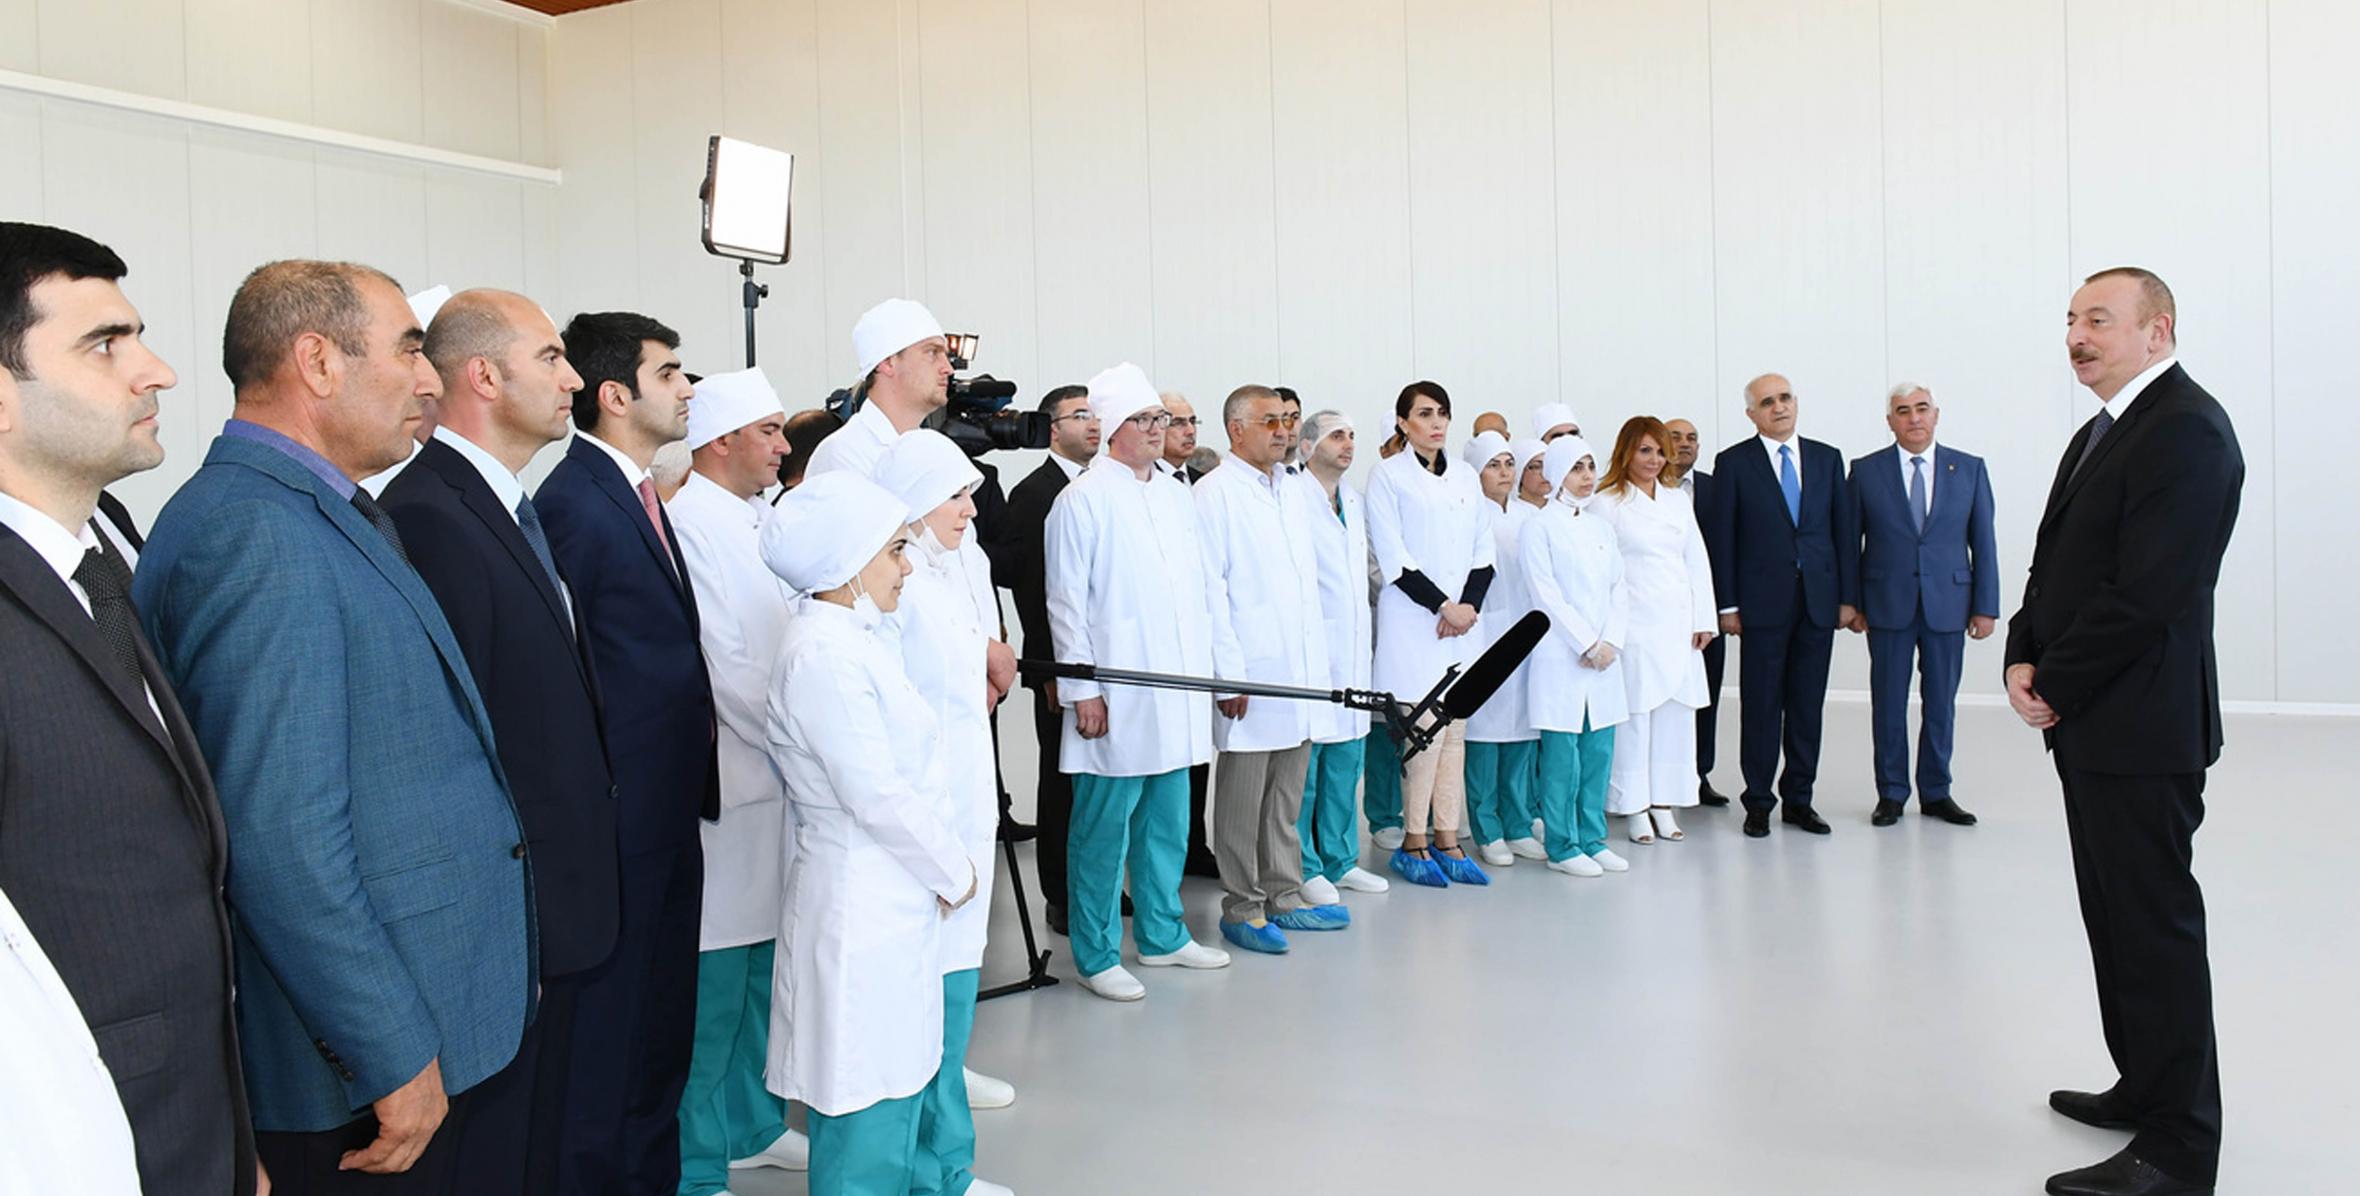 Speech by Ilham Aliyev at the opening of “Diamed Co” syringe plant in Pirallahi Industrial Park